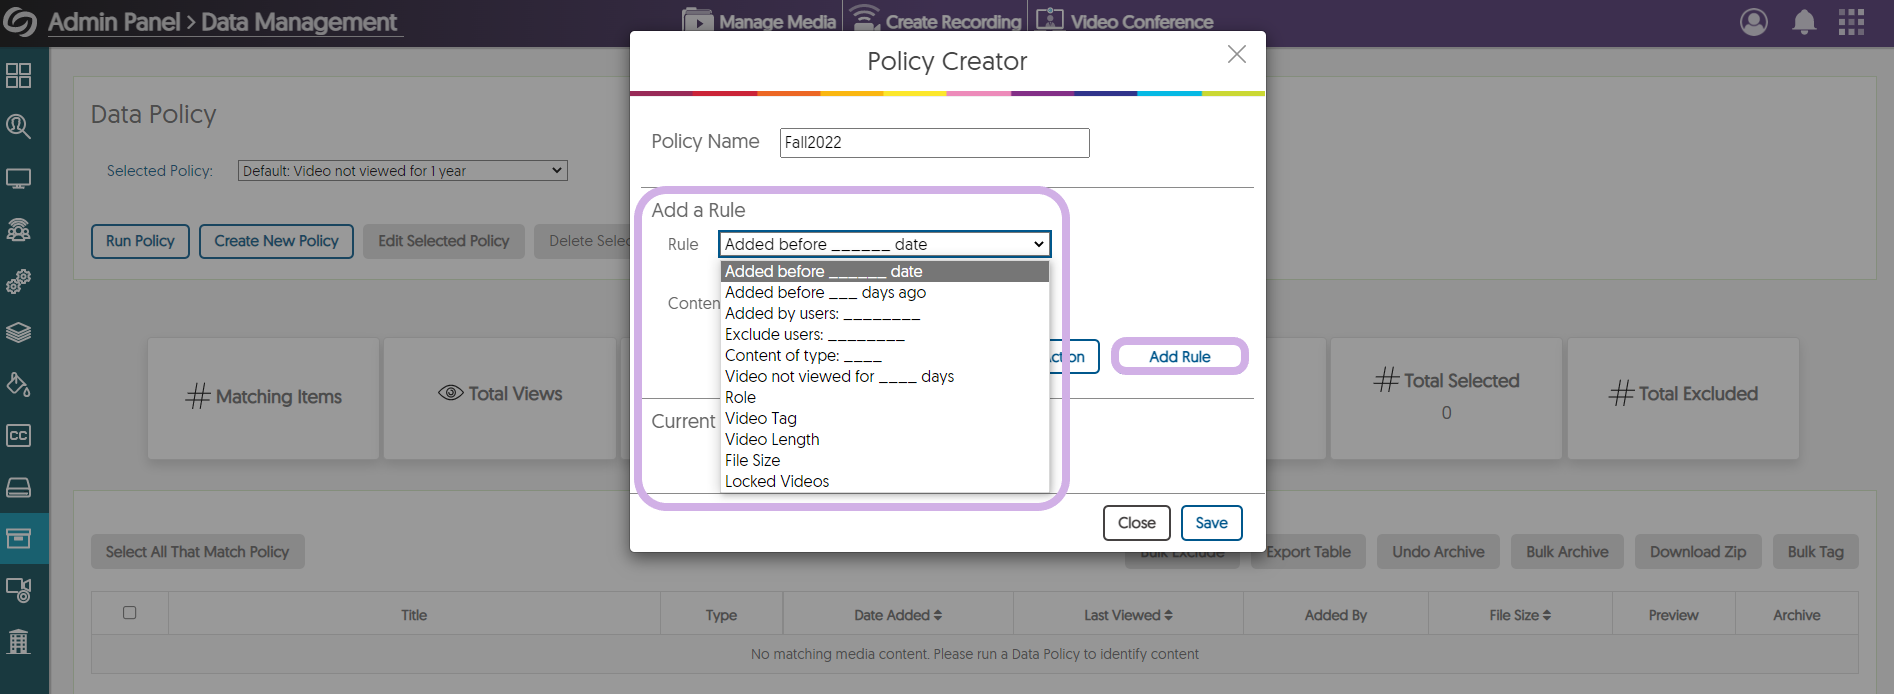 Policy Creator window with Add a Rule highlighted.